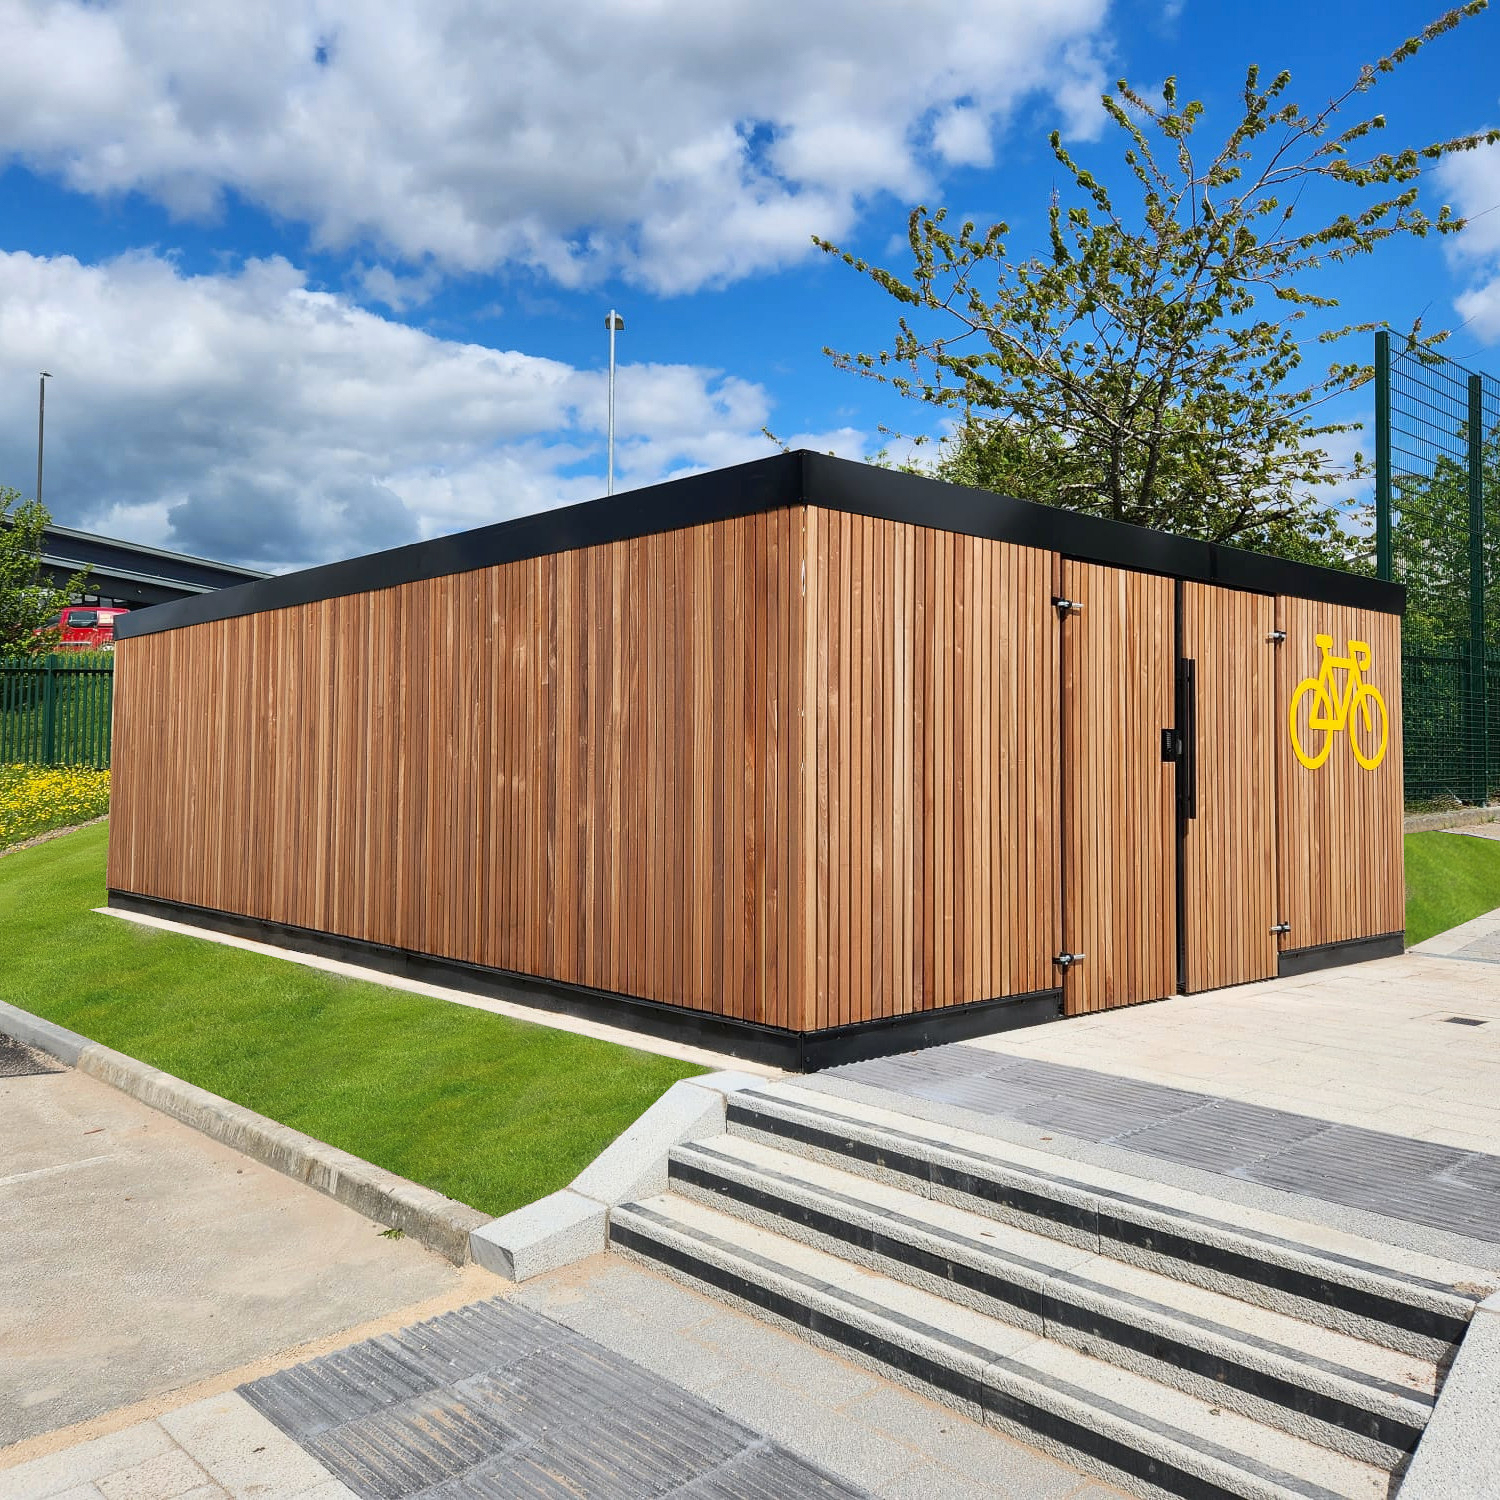 A modern wooden bike shed with a large bicycle symbol, located outside in a sunny environment.